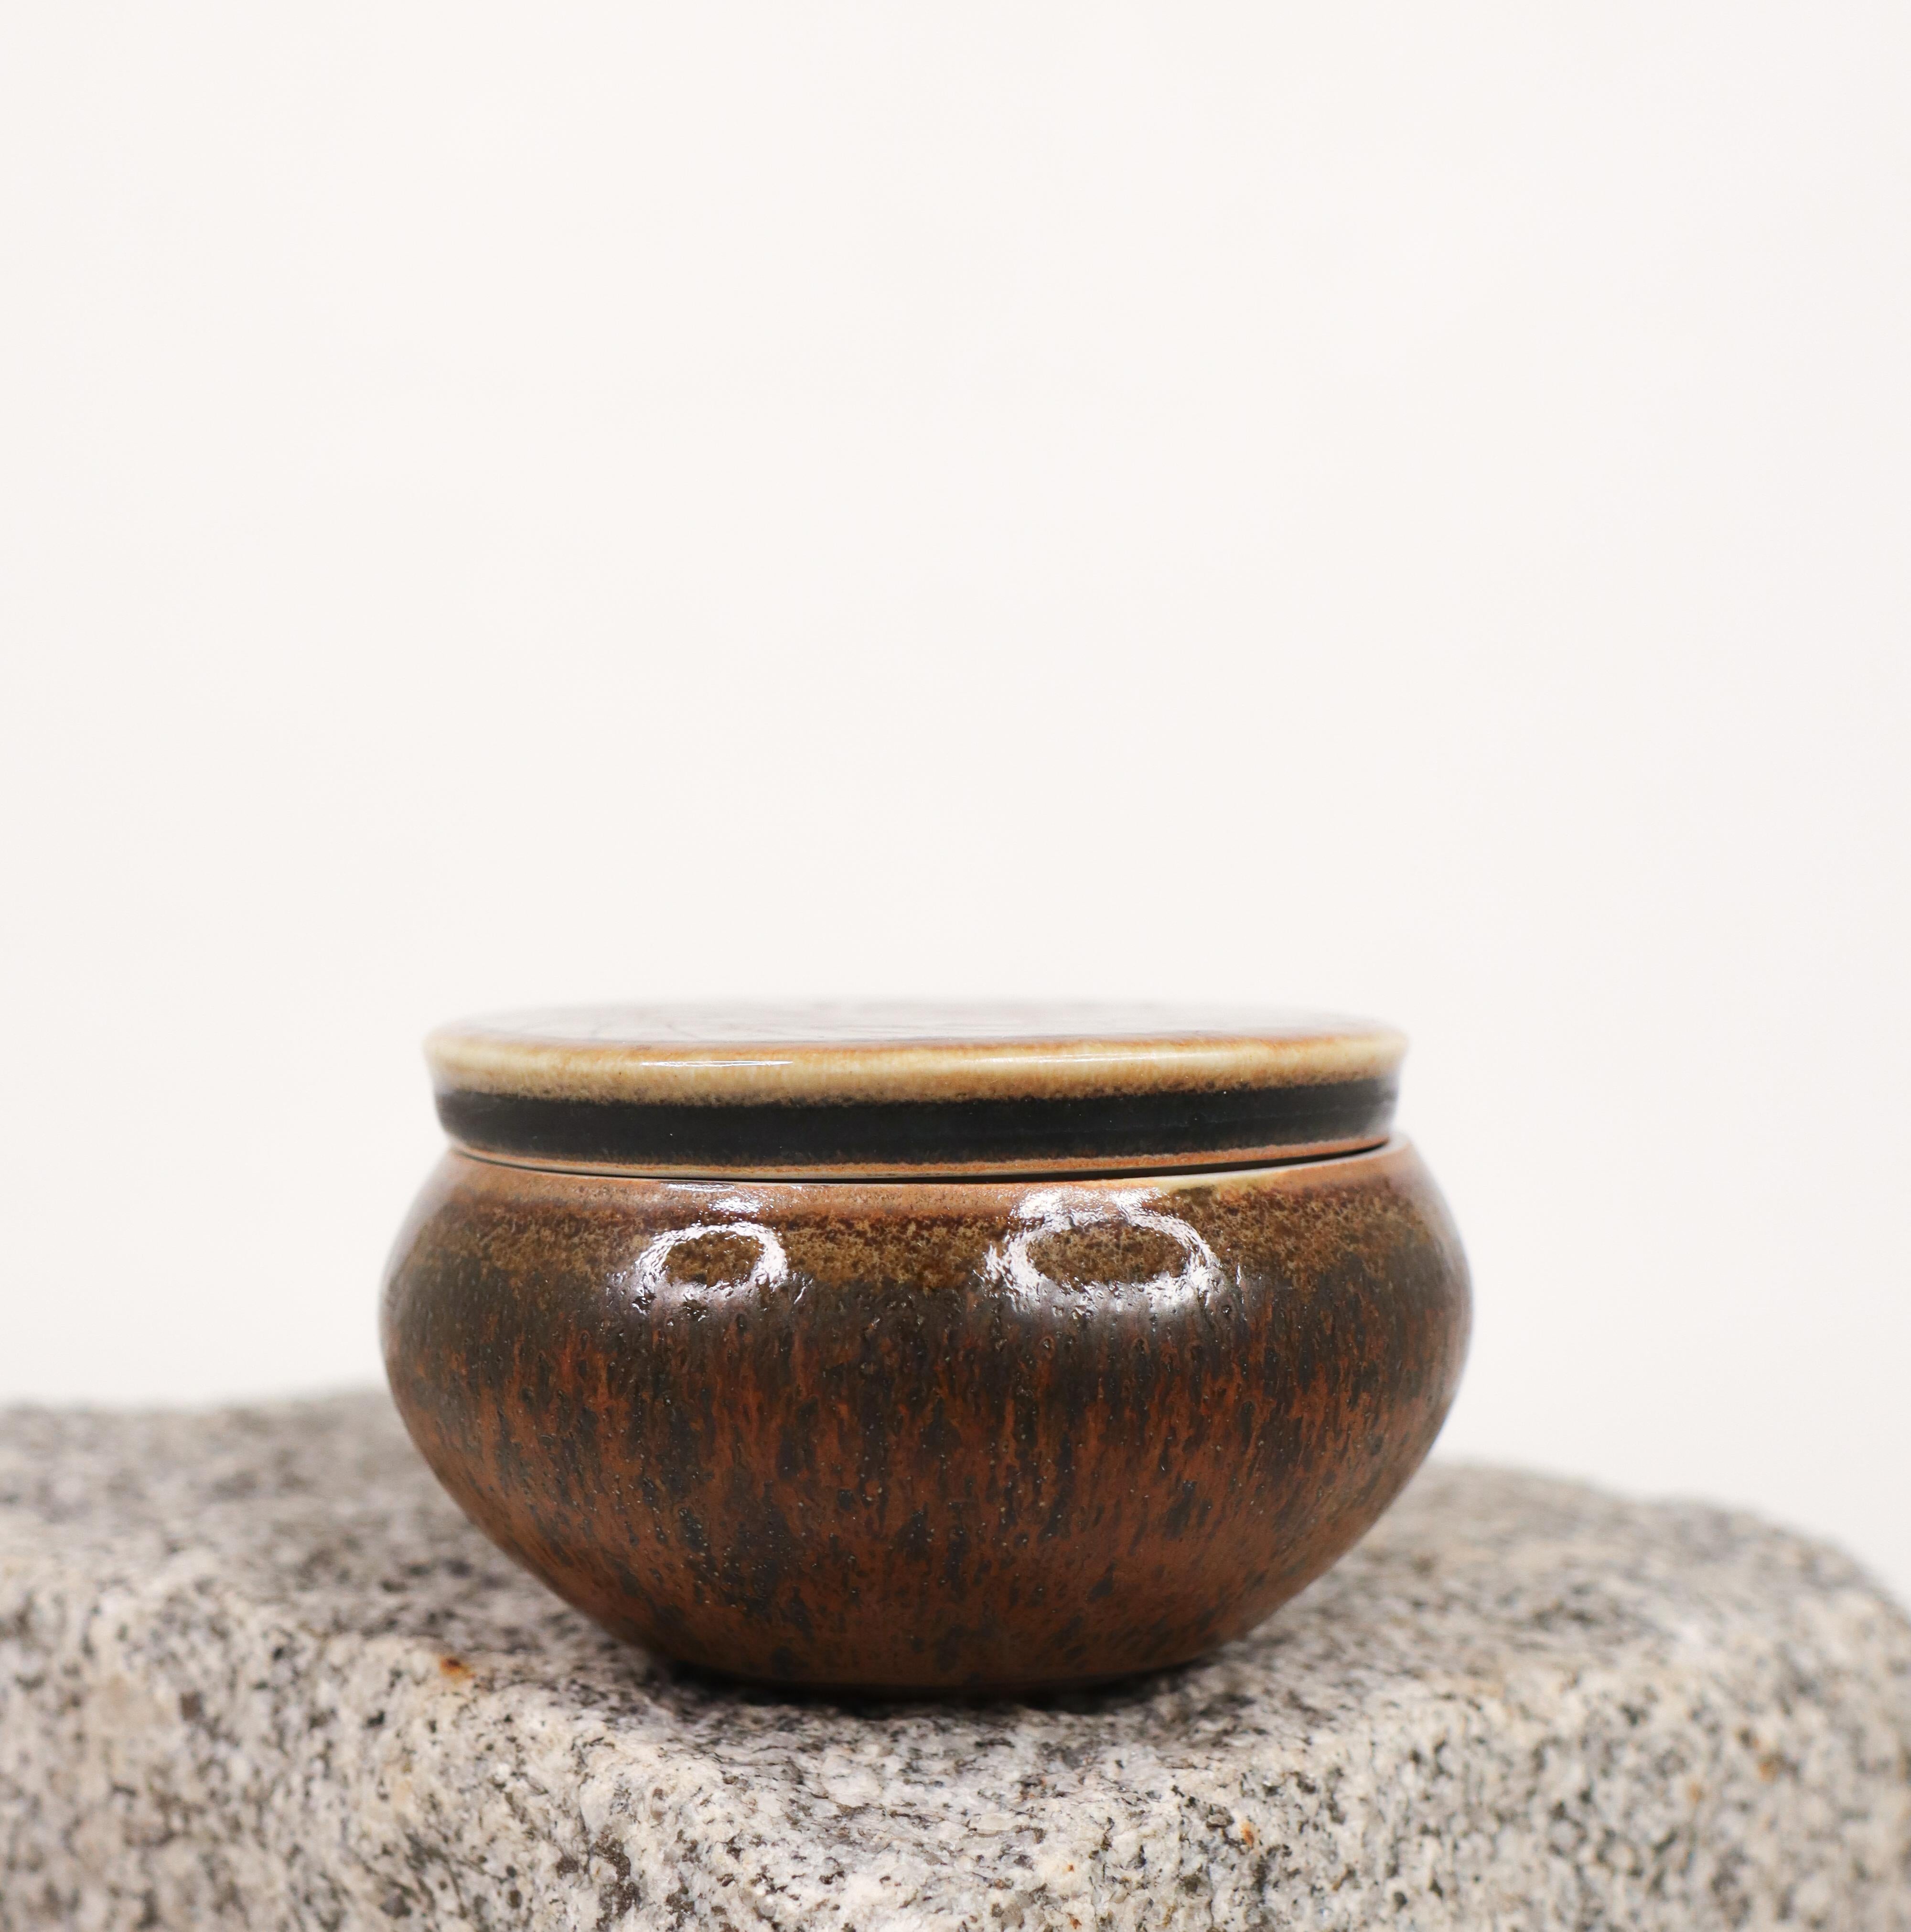 A brown & gray lidded bowl designed by Carl-Harry Stålhane at Rörstrand The bowl is 9 cm (3.6